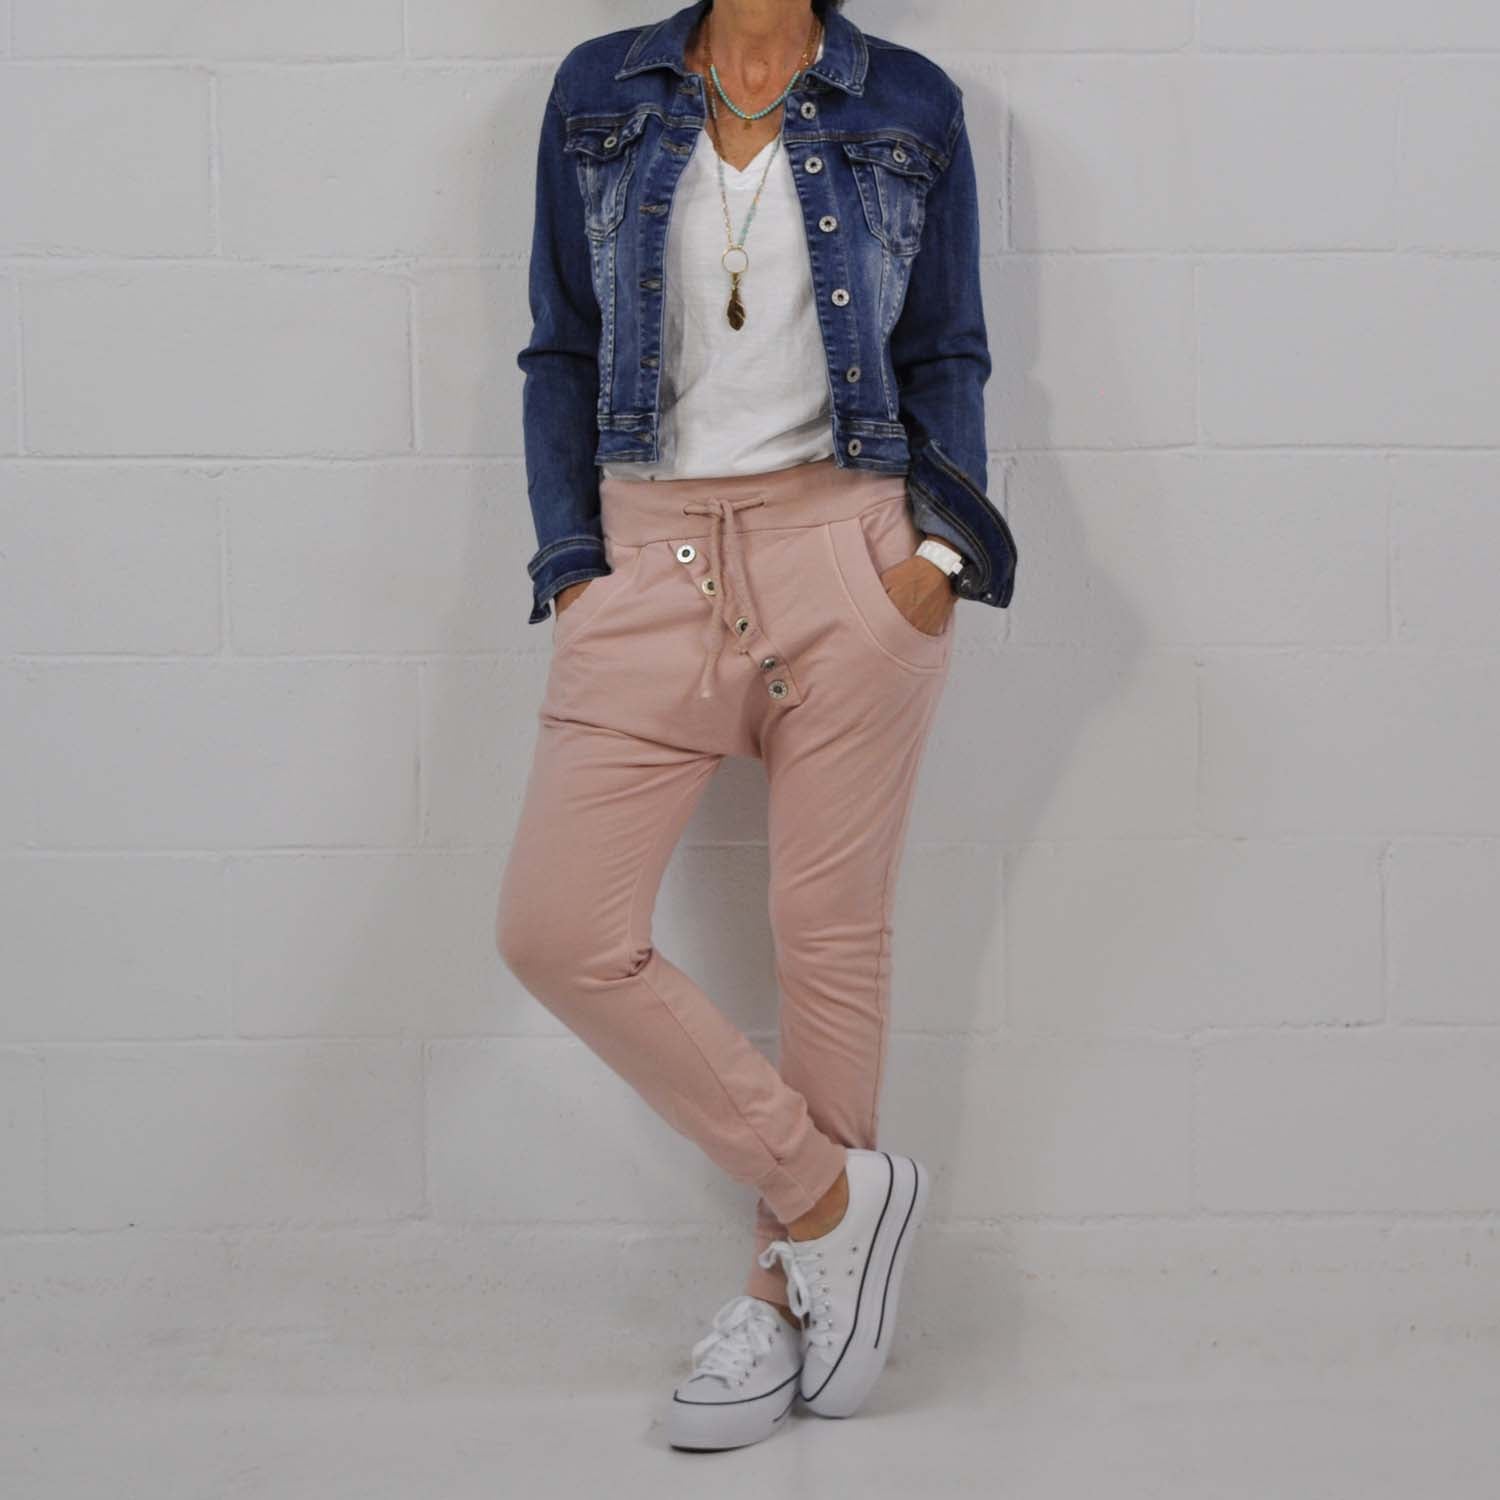 Womens Pink Pants Outfit